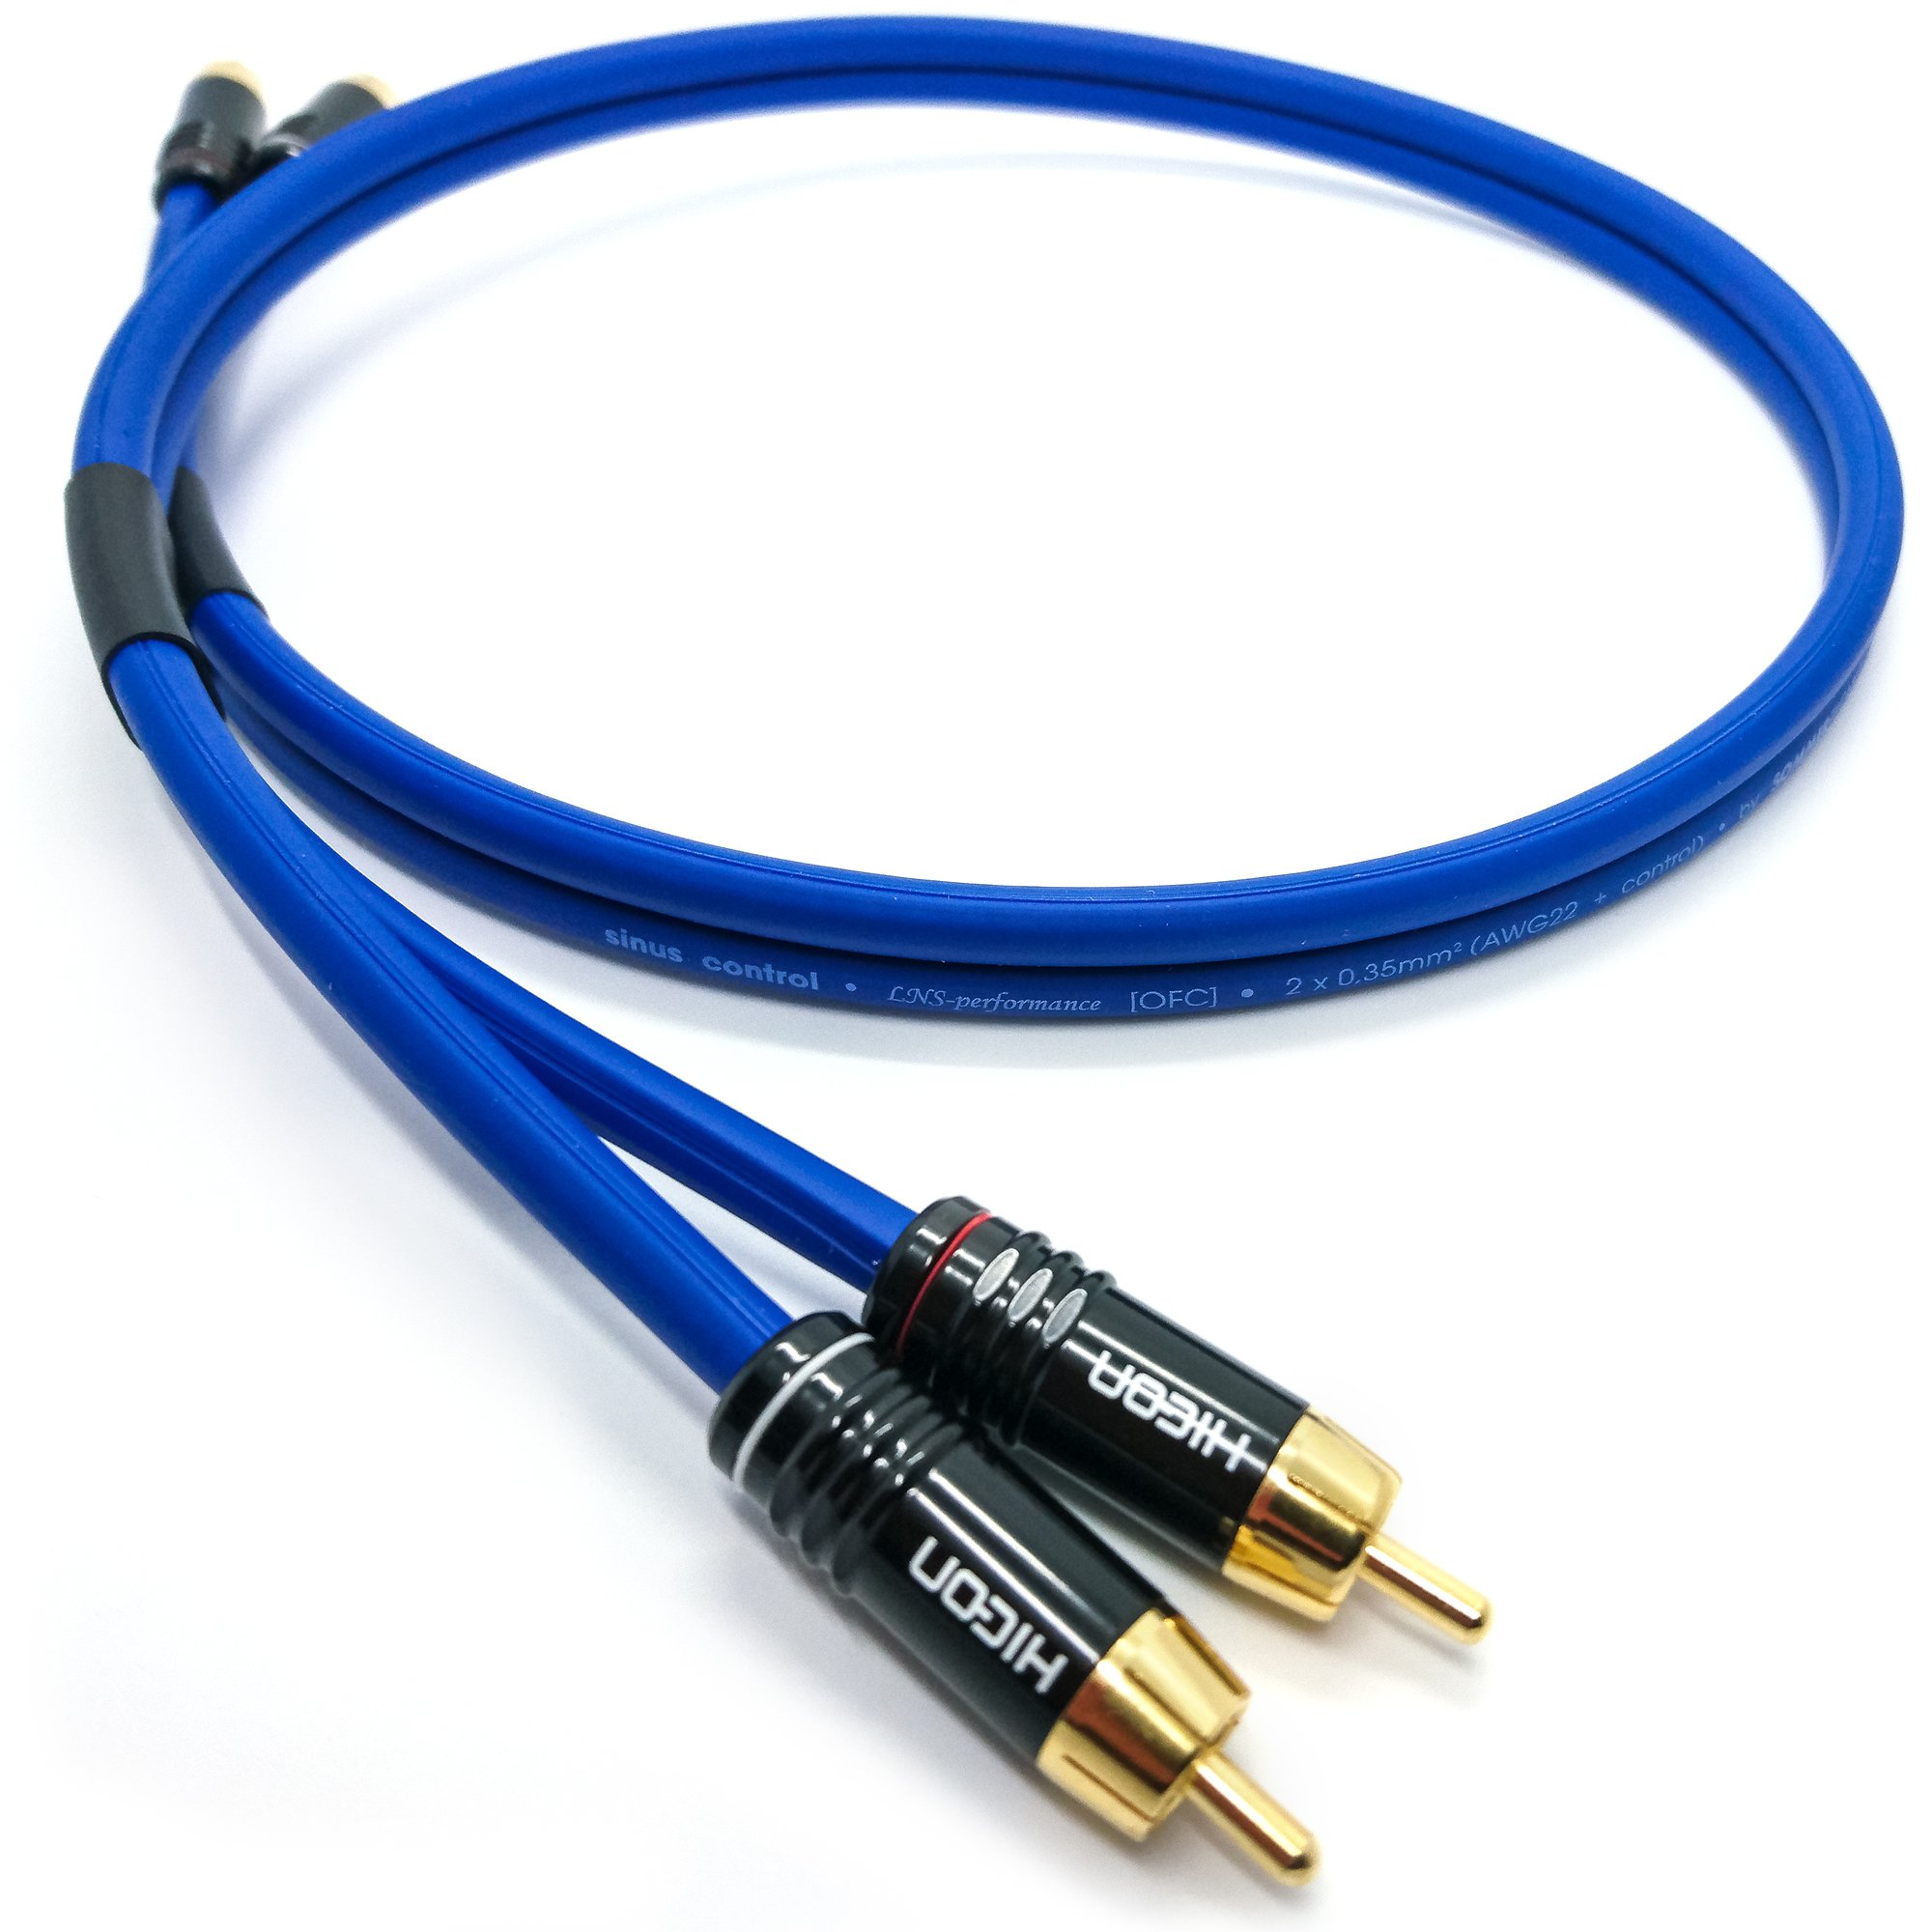 Selected Cable 1,5m NF- Cinchkabel OFC HiFi-Stereo 2x 0,35mm² Sinus Control 150cm - SC81-06-K-0150